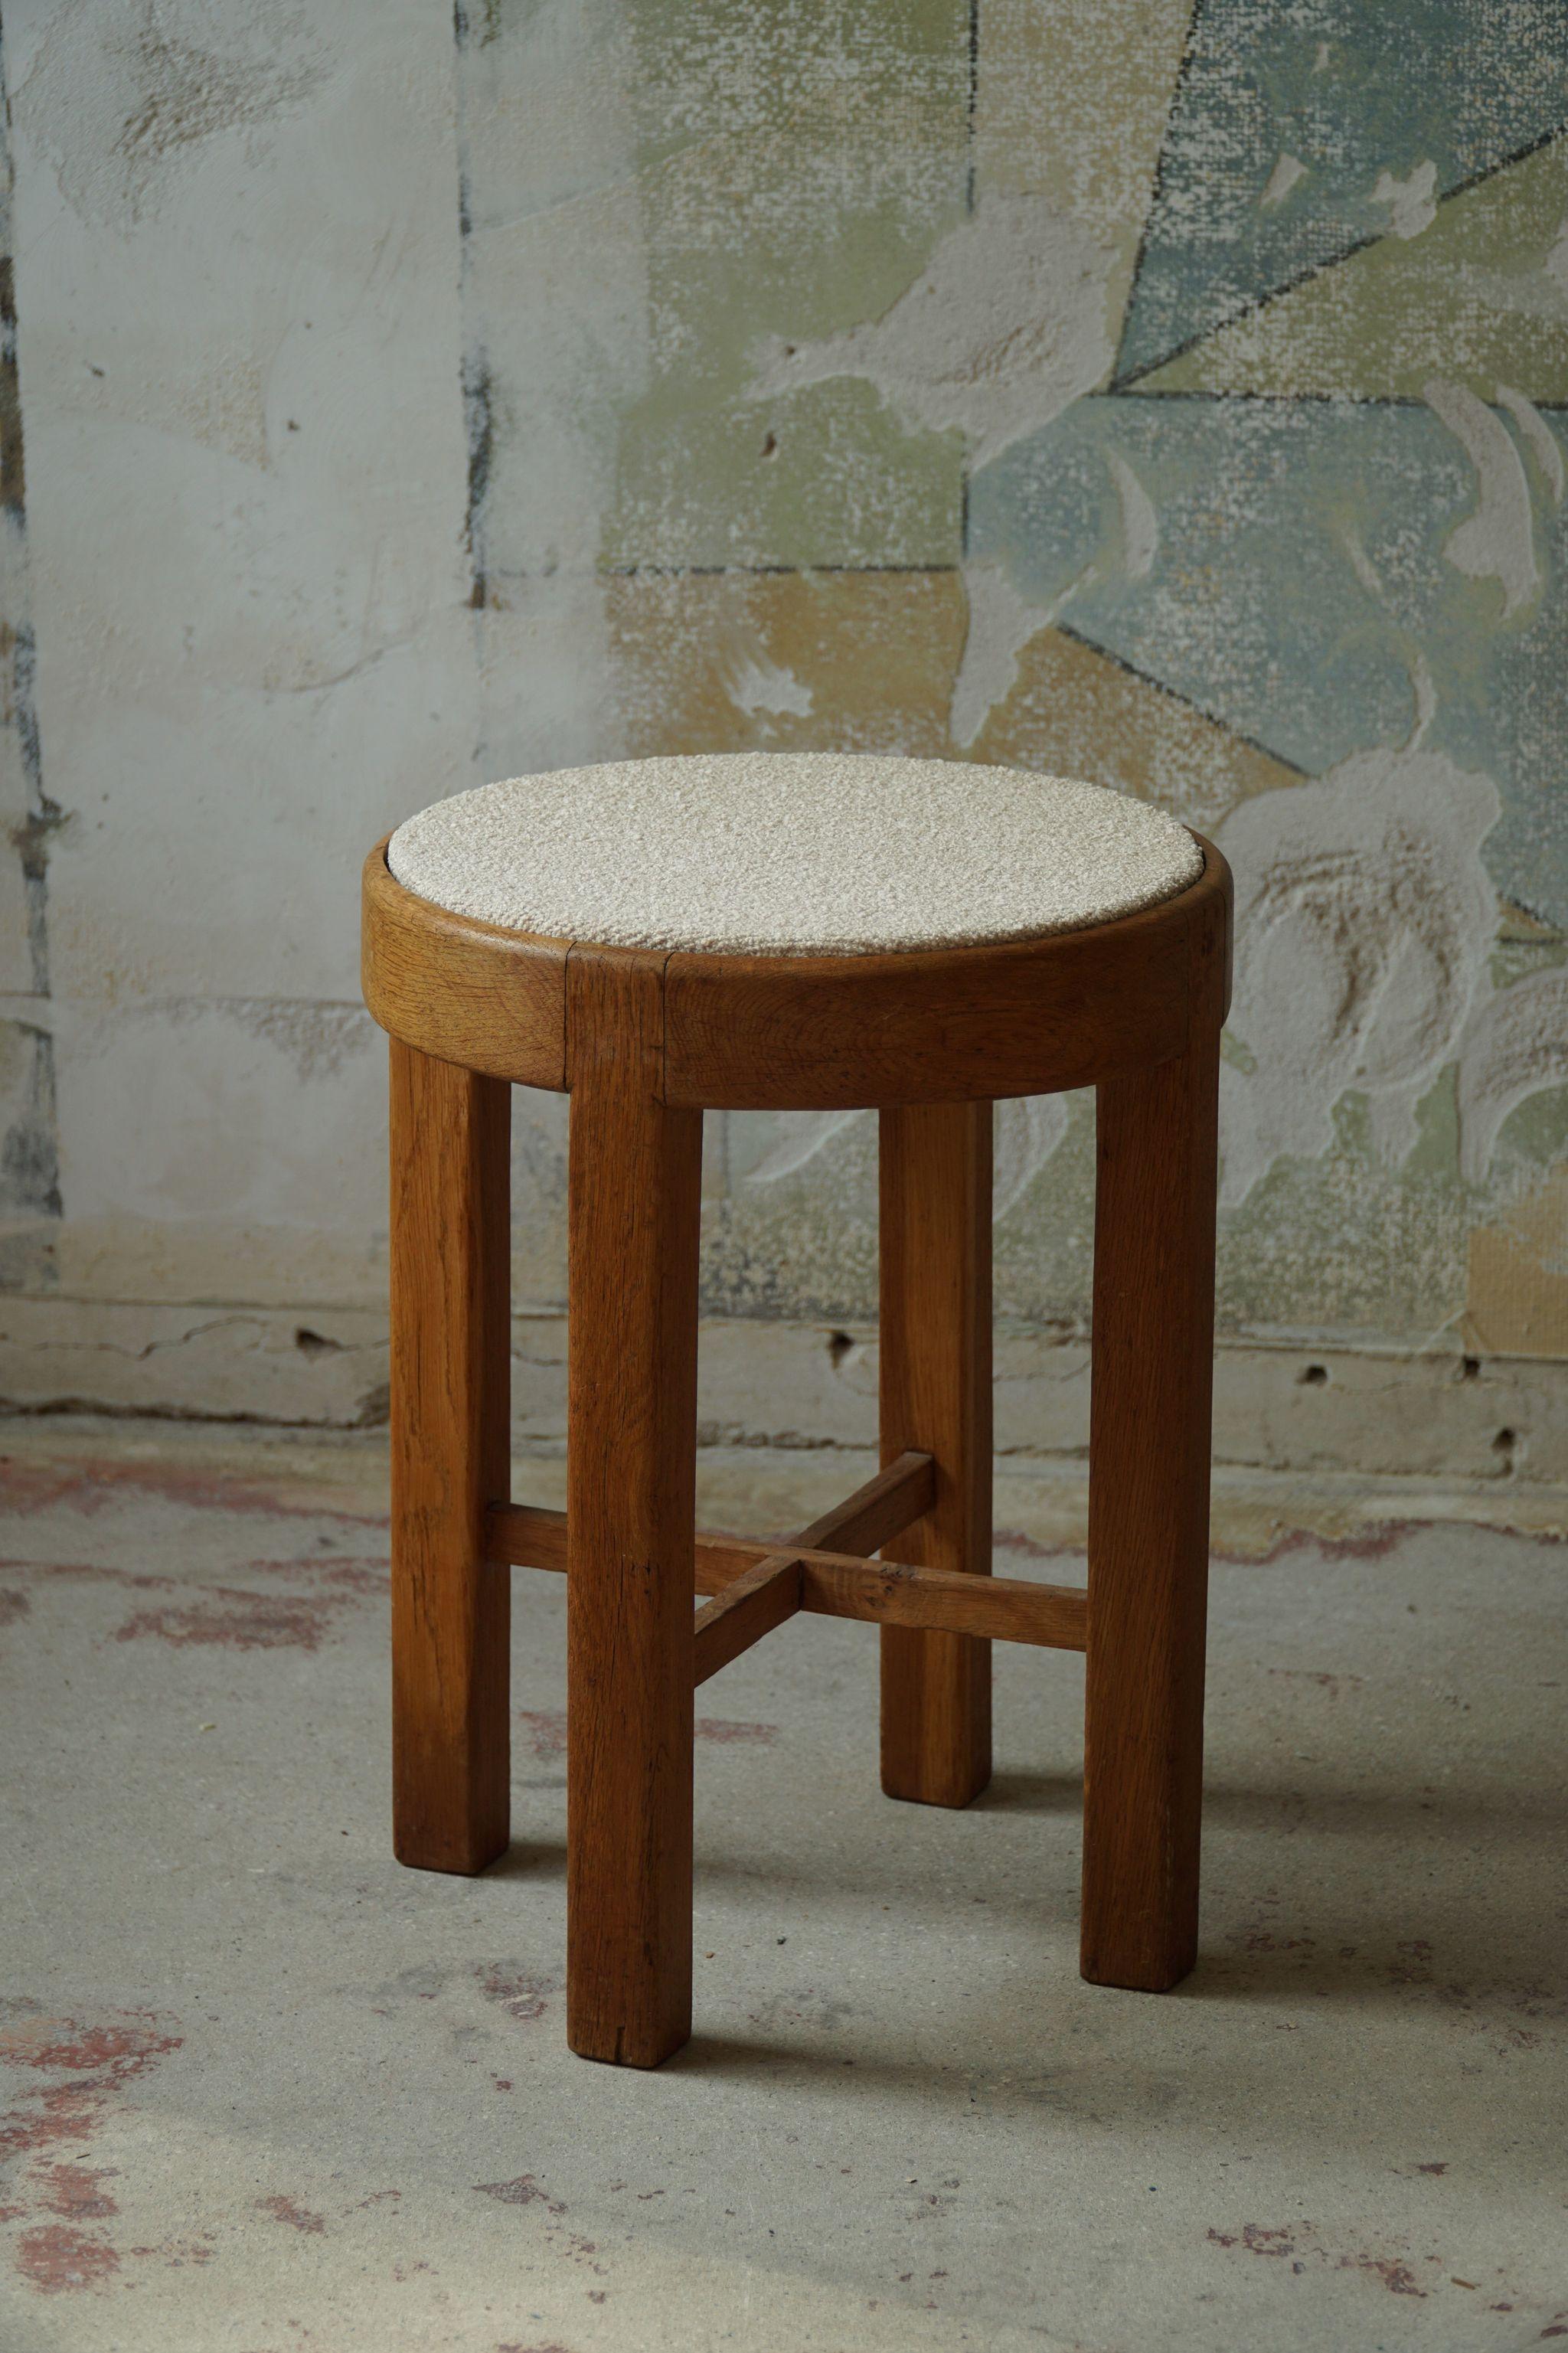 Danish Mid Century Stool in Oak and Reupholstered in Bouclé Wool, ca 1950s For Sale 4